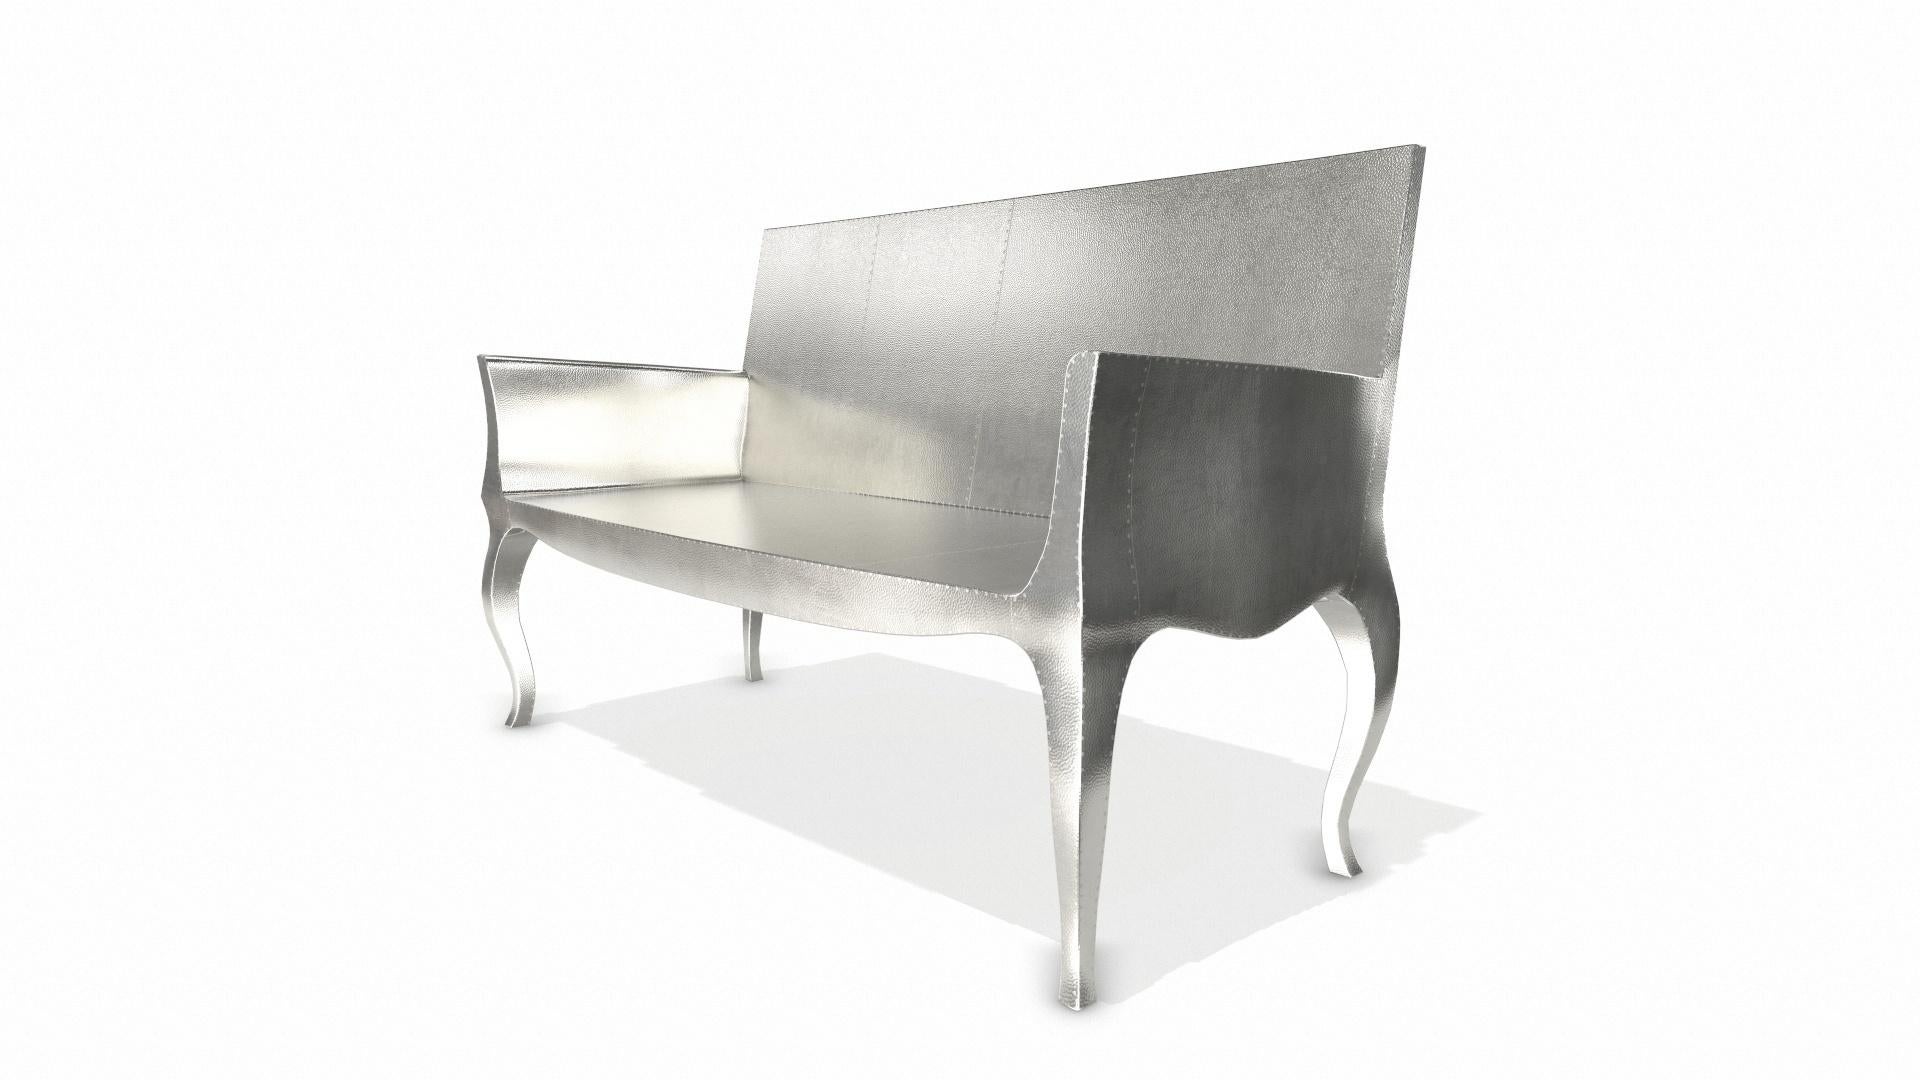 Woodwork Louise Settee Art Deco Benches in Mid. Hammered White Bronze by Paul Mathieu For Sale